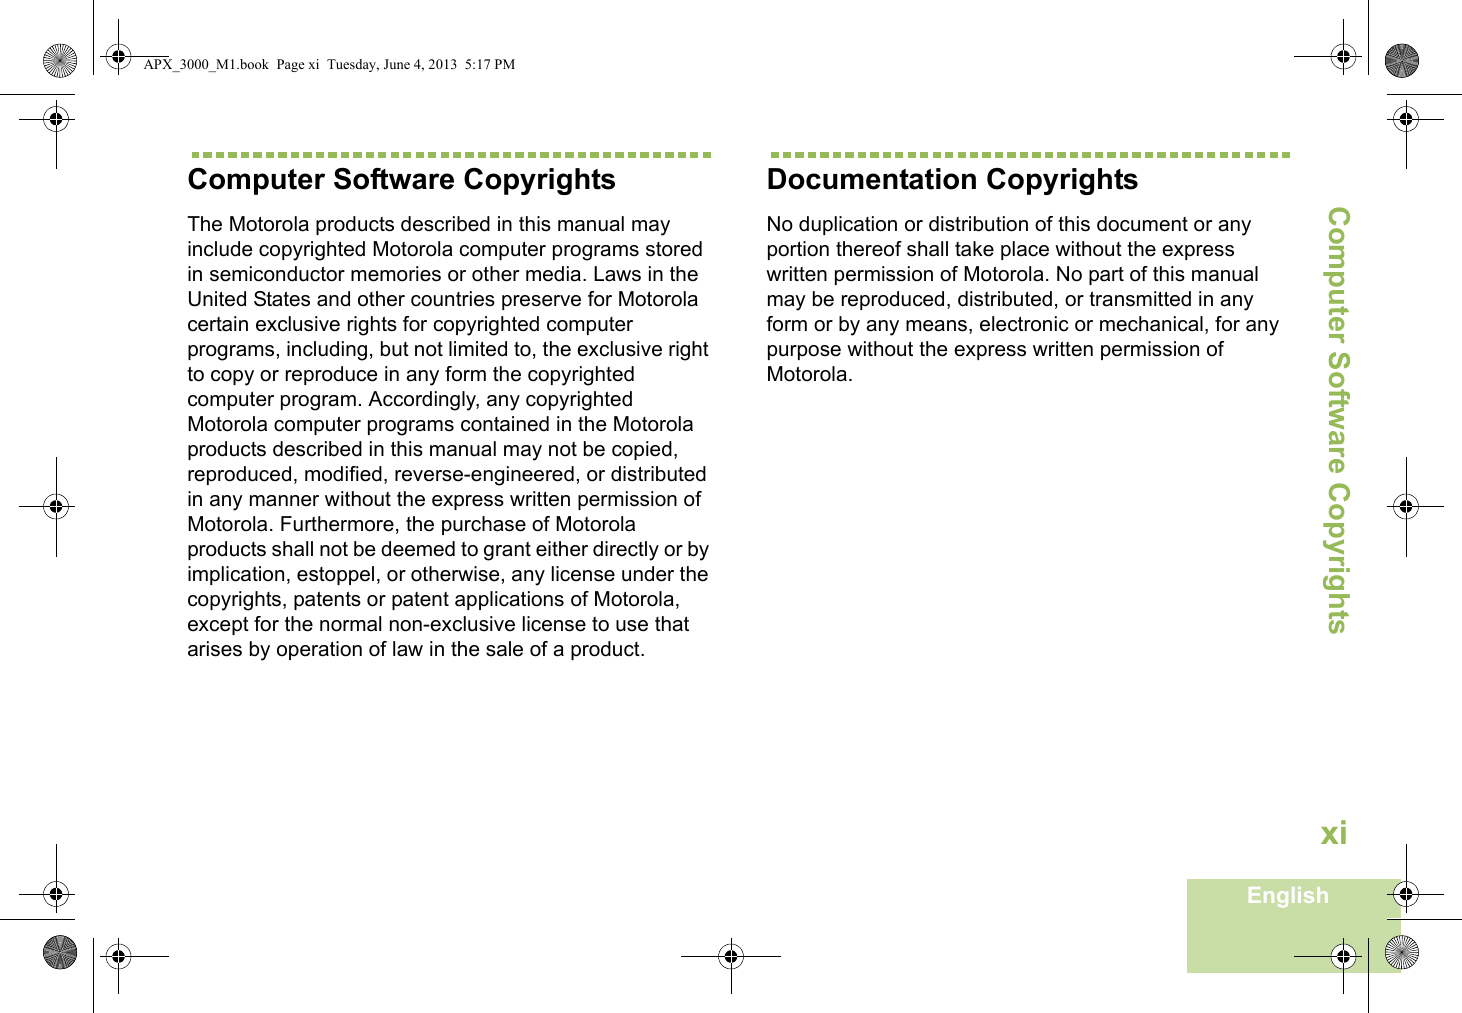 Computer Software CopyrightsEnglishxiComputer Software CopyrightsThe Motorola products described in this manual may include copyrighted Motorola computer programs stored in semiconductor memories or other media. Laws in the United States and other countries preserve for Motorola certain exclusive rights for copyrighted computer programs, including, but not limited to, the exclusive right to copy or reproduce in any form the copyrighted computer program. Accordingly, any copyrighted Motorola computer programs contained in the Motorola products described in this manual may not be copied, reproduced, modified, reverse-engineered, or distributed in any manner without the express written permission of Motorola. Furthermore, the purchase of Motorola products shall not be deemed to grant either directly or by implication, estoppel, or otherwise, any license under the copyrights, patents or patent applications of Motorola, except for the normal non-exclusive license to use that arises by operation of law in the sale of a product.Documentation CopyrightsNo duplication or distribution of this document or any portion thereof shall take place without the express written permission of Motorola. No part of this manual may be reproduced, distributed, or transmitted in any form or by any means, electronic or mechanical, for any purpose without the express written permission of Motorola.APX_3000_M1.book  Page xi  Tuesday, June 4, 2013  5:17 PM